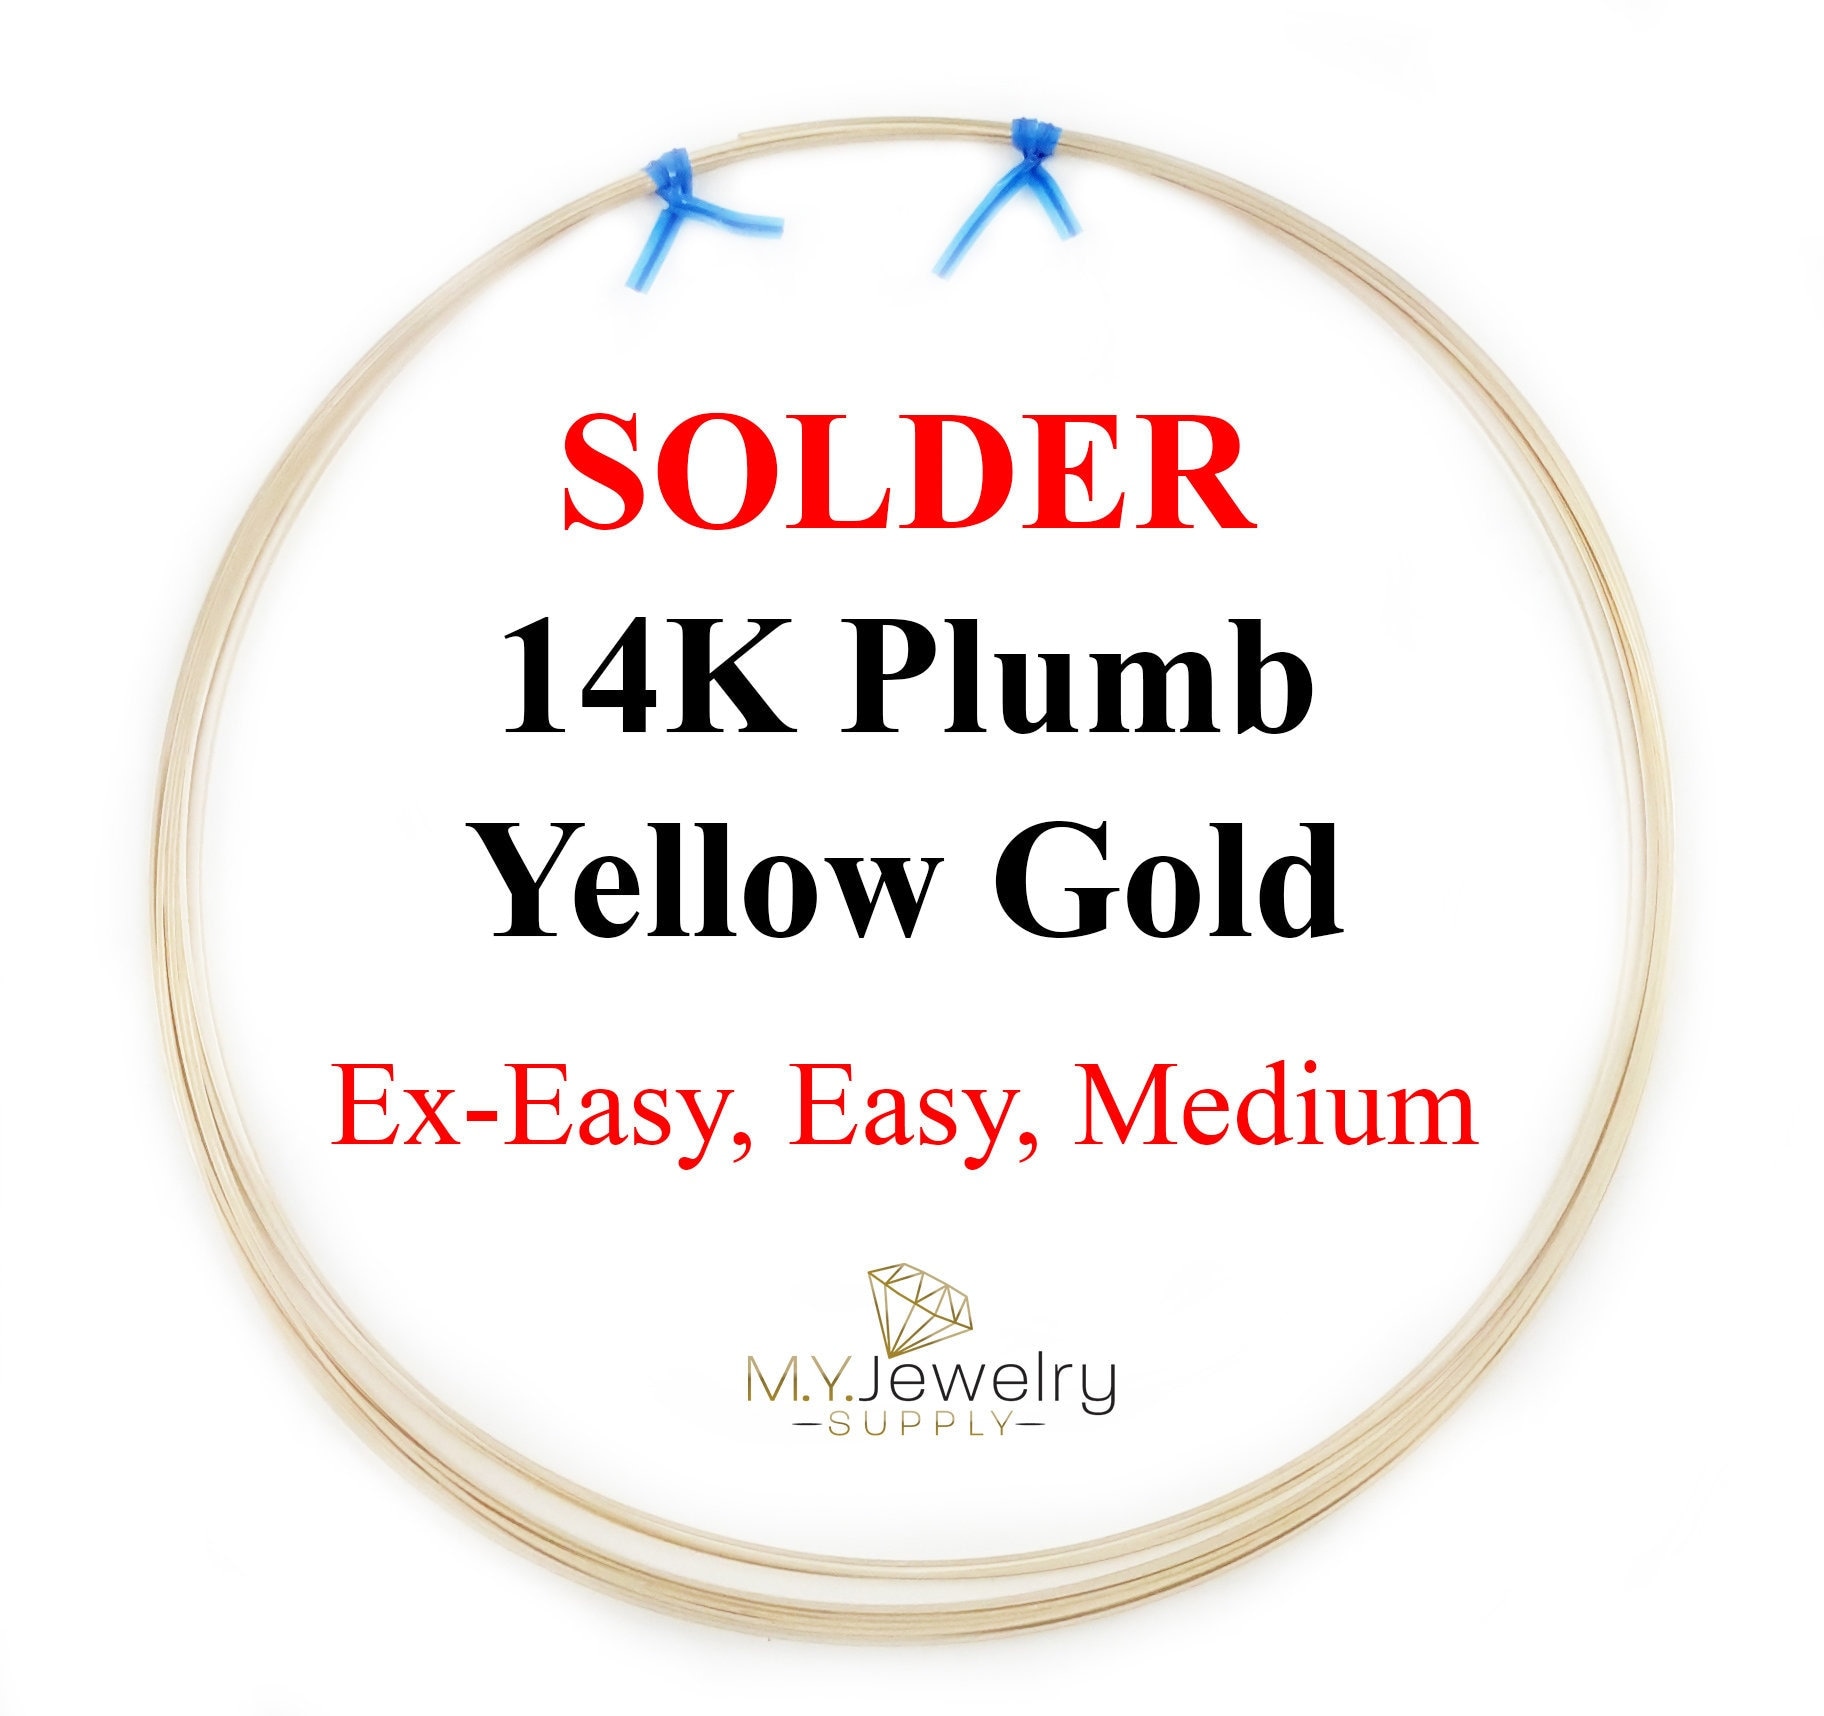 3 Inches Solder Wire 14K Plumb Yellow Gold Medium 22 Gauge Cadmium-Free by Craft Wire